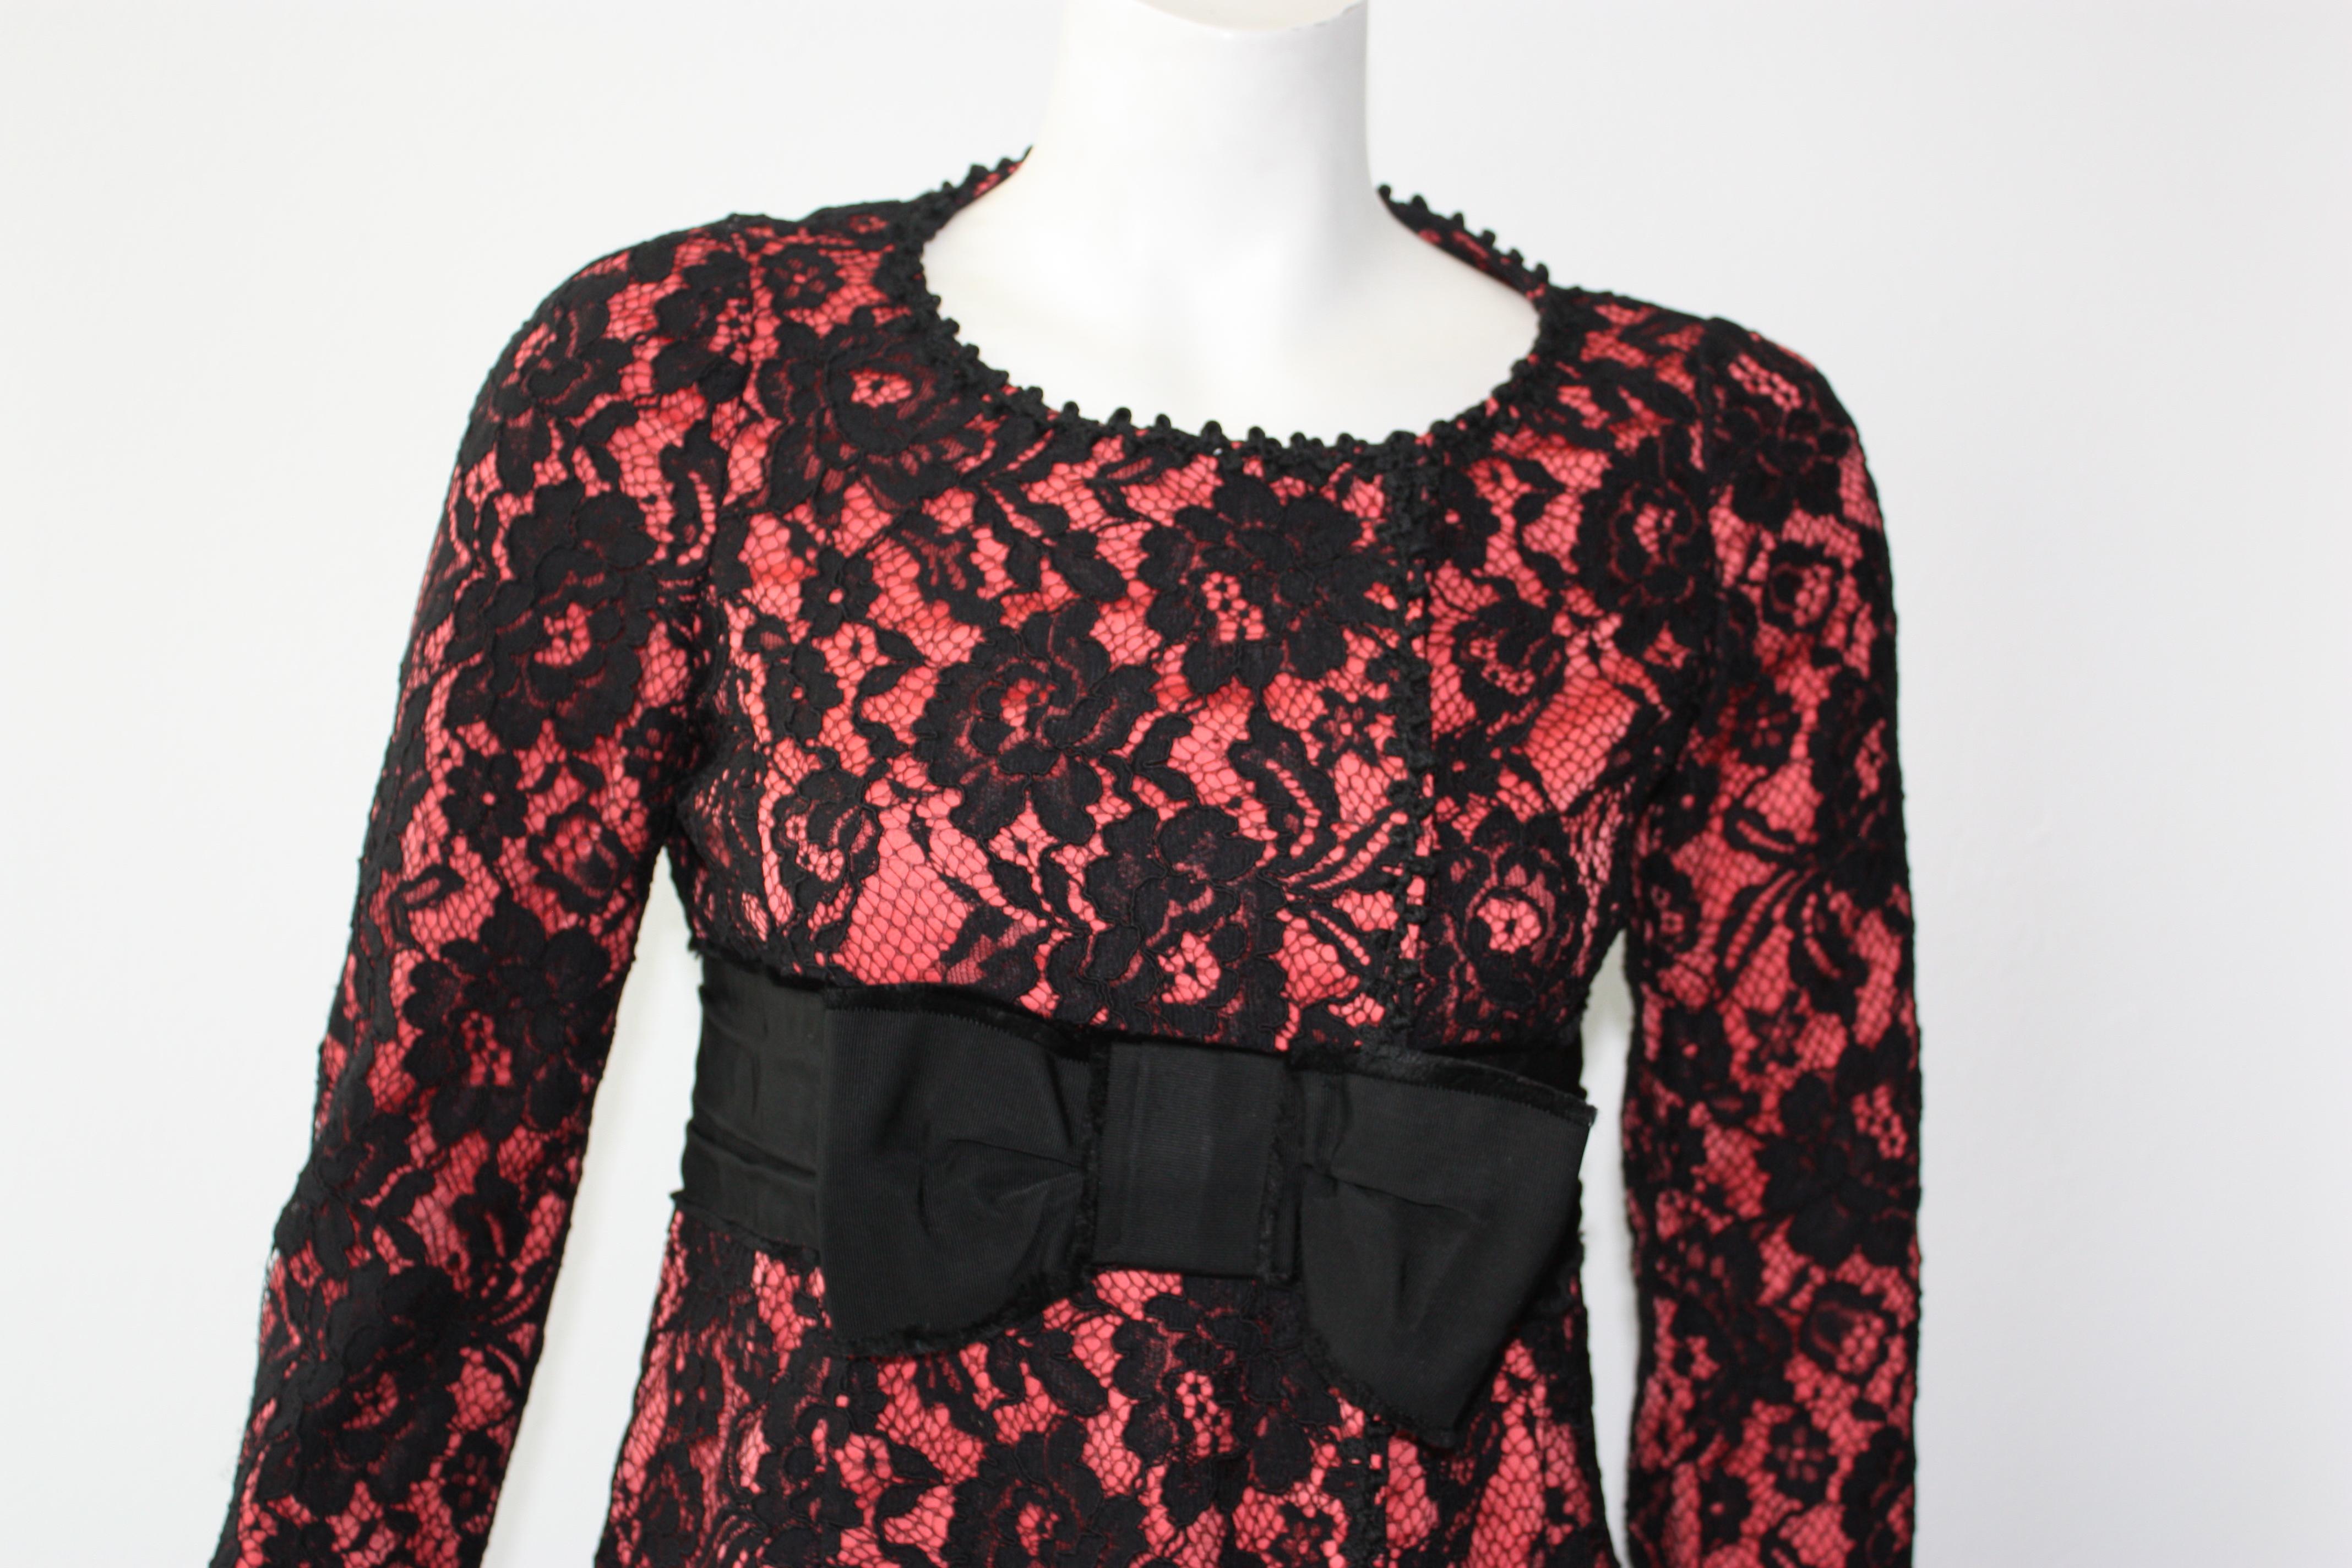 Women's Moschino Lace Black and Pink Waist Coat with Bow Size 6 